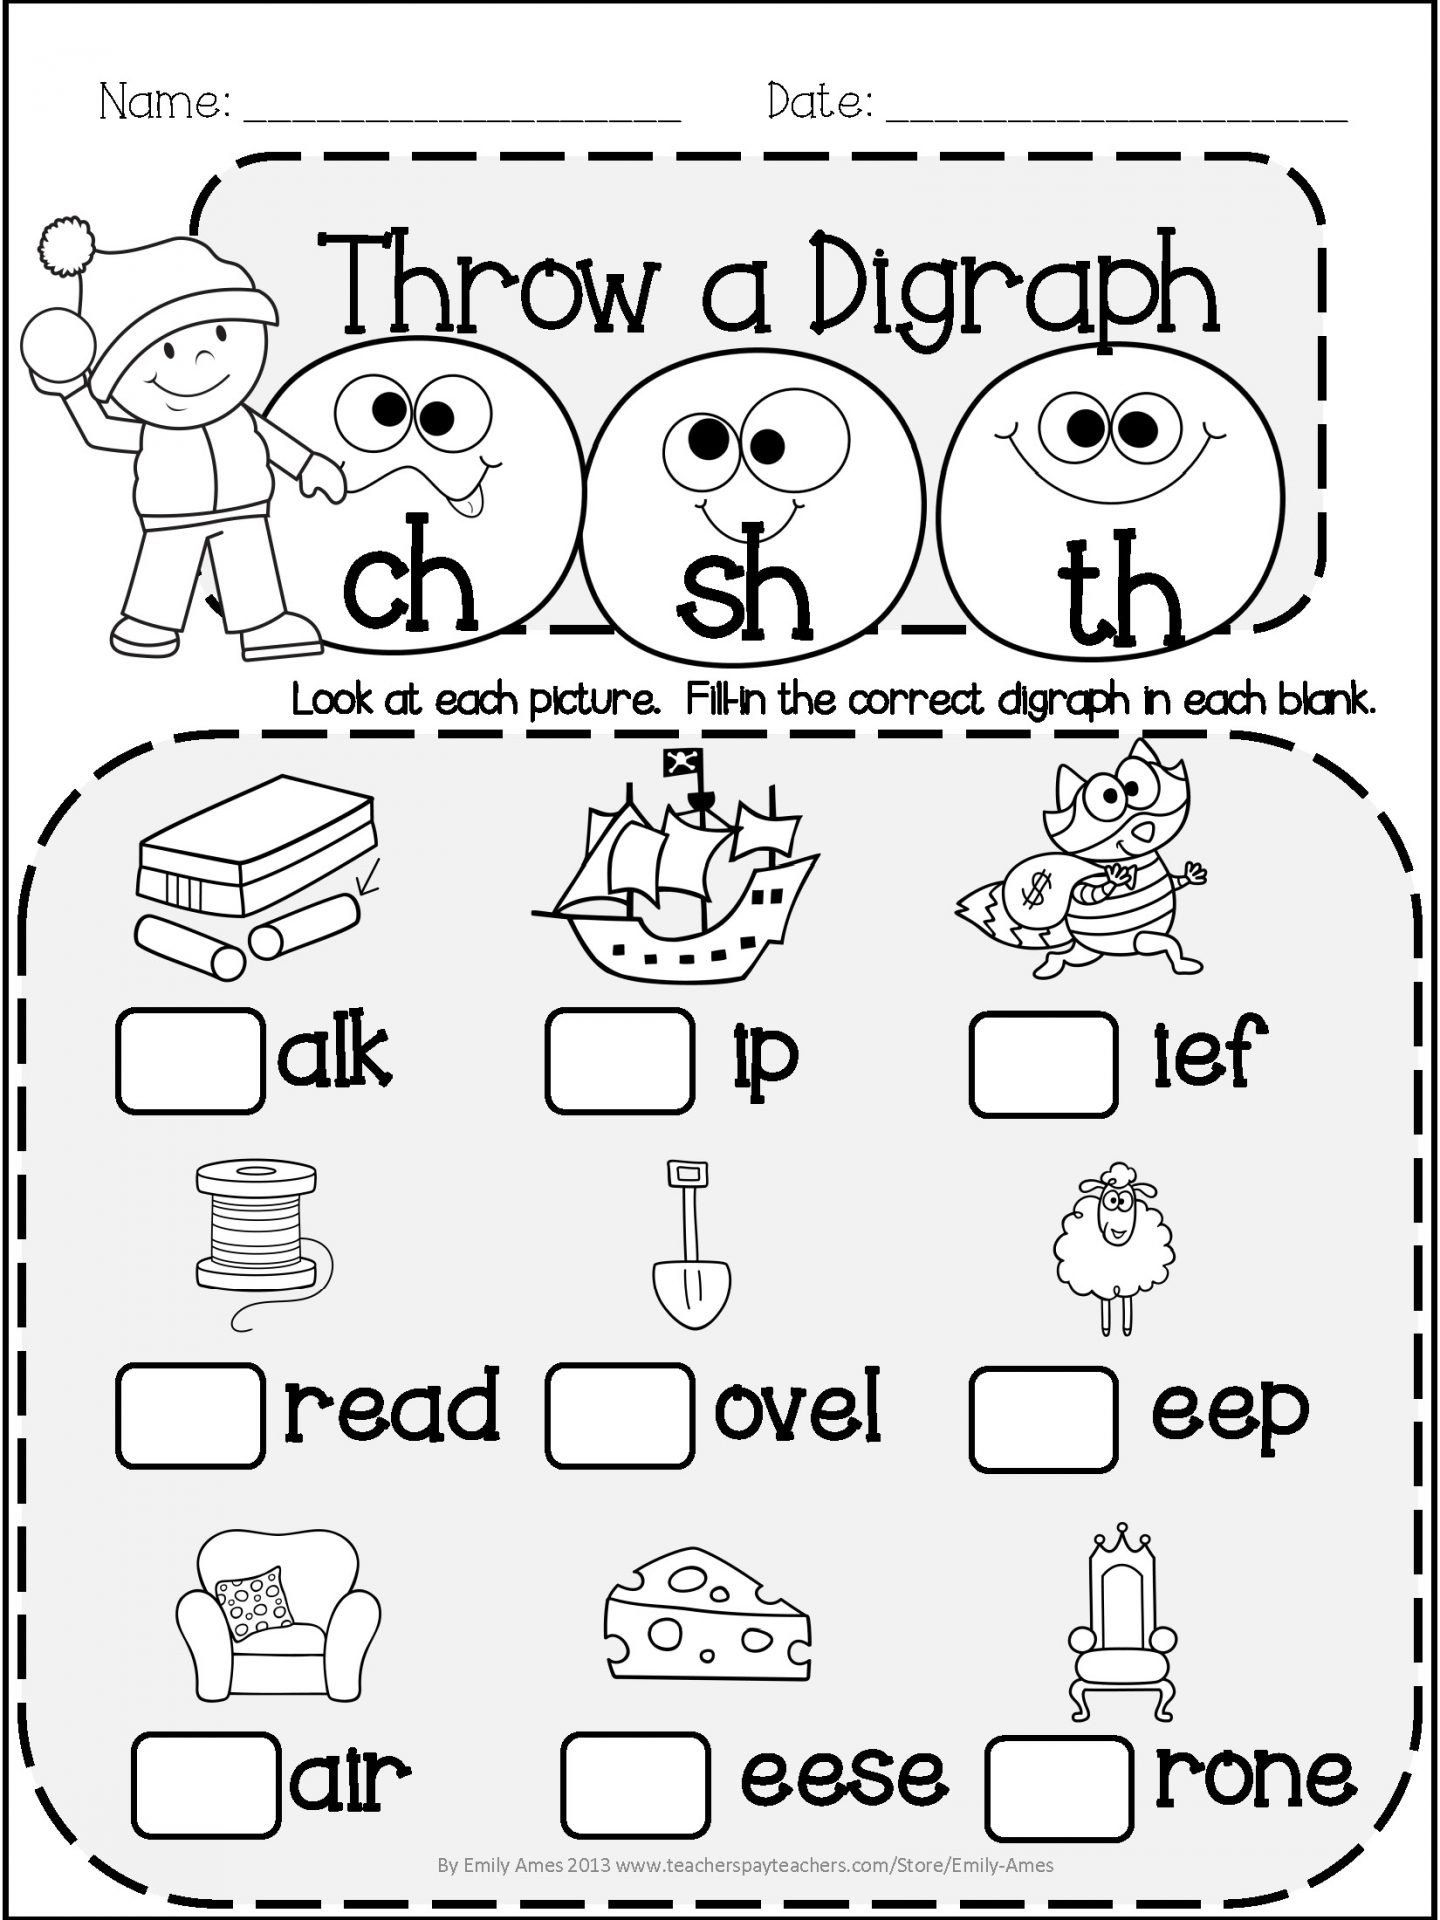 Awesome Collection Of Blends And Digraphs Worksheets Best Of Vowels For Blends And Digraphs Worksheets